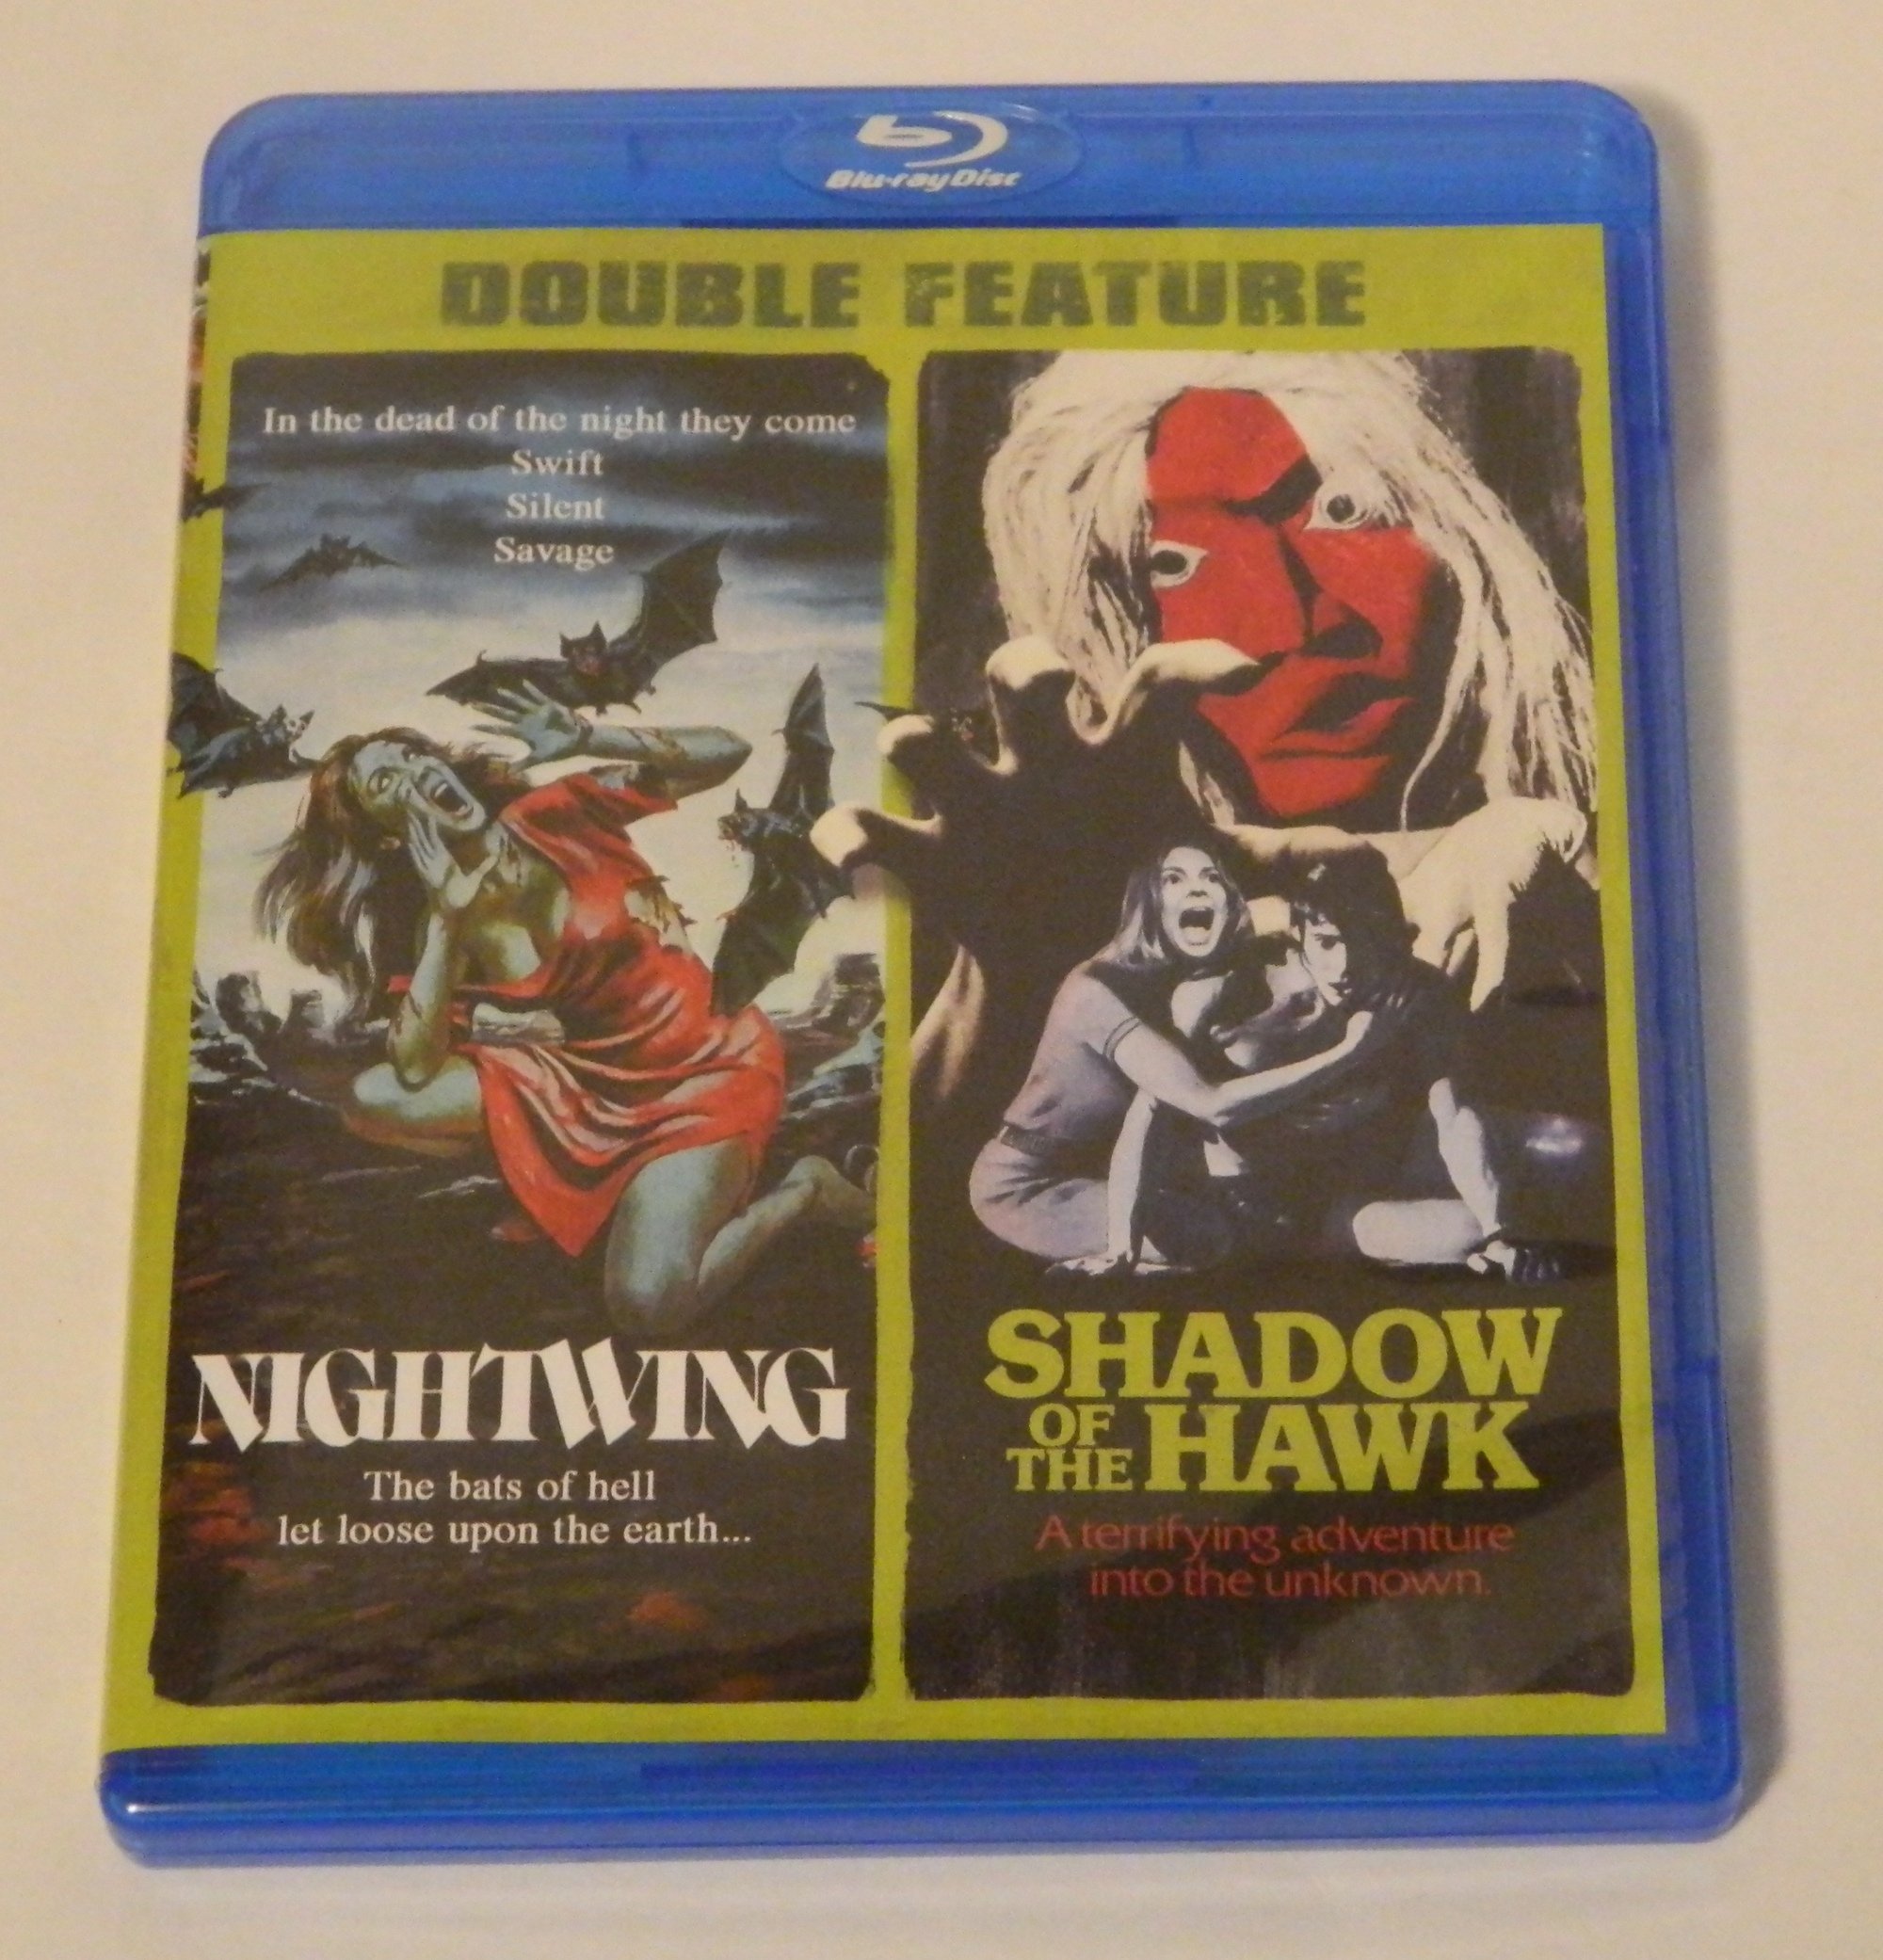 Nightwing/Shadow of the Hawk Double Feature Blu-ray